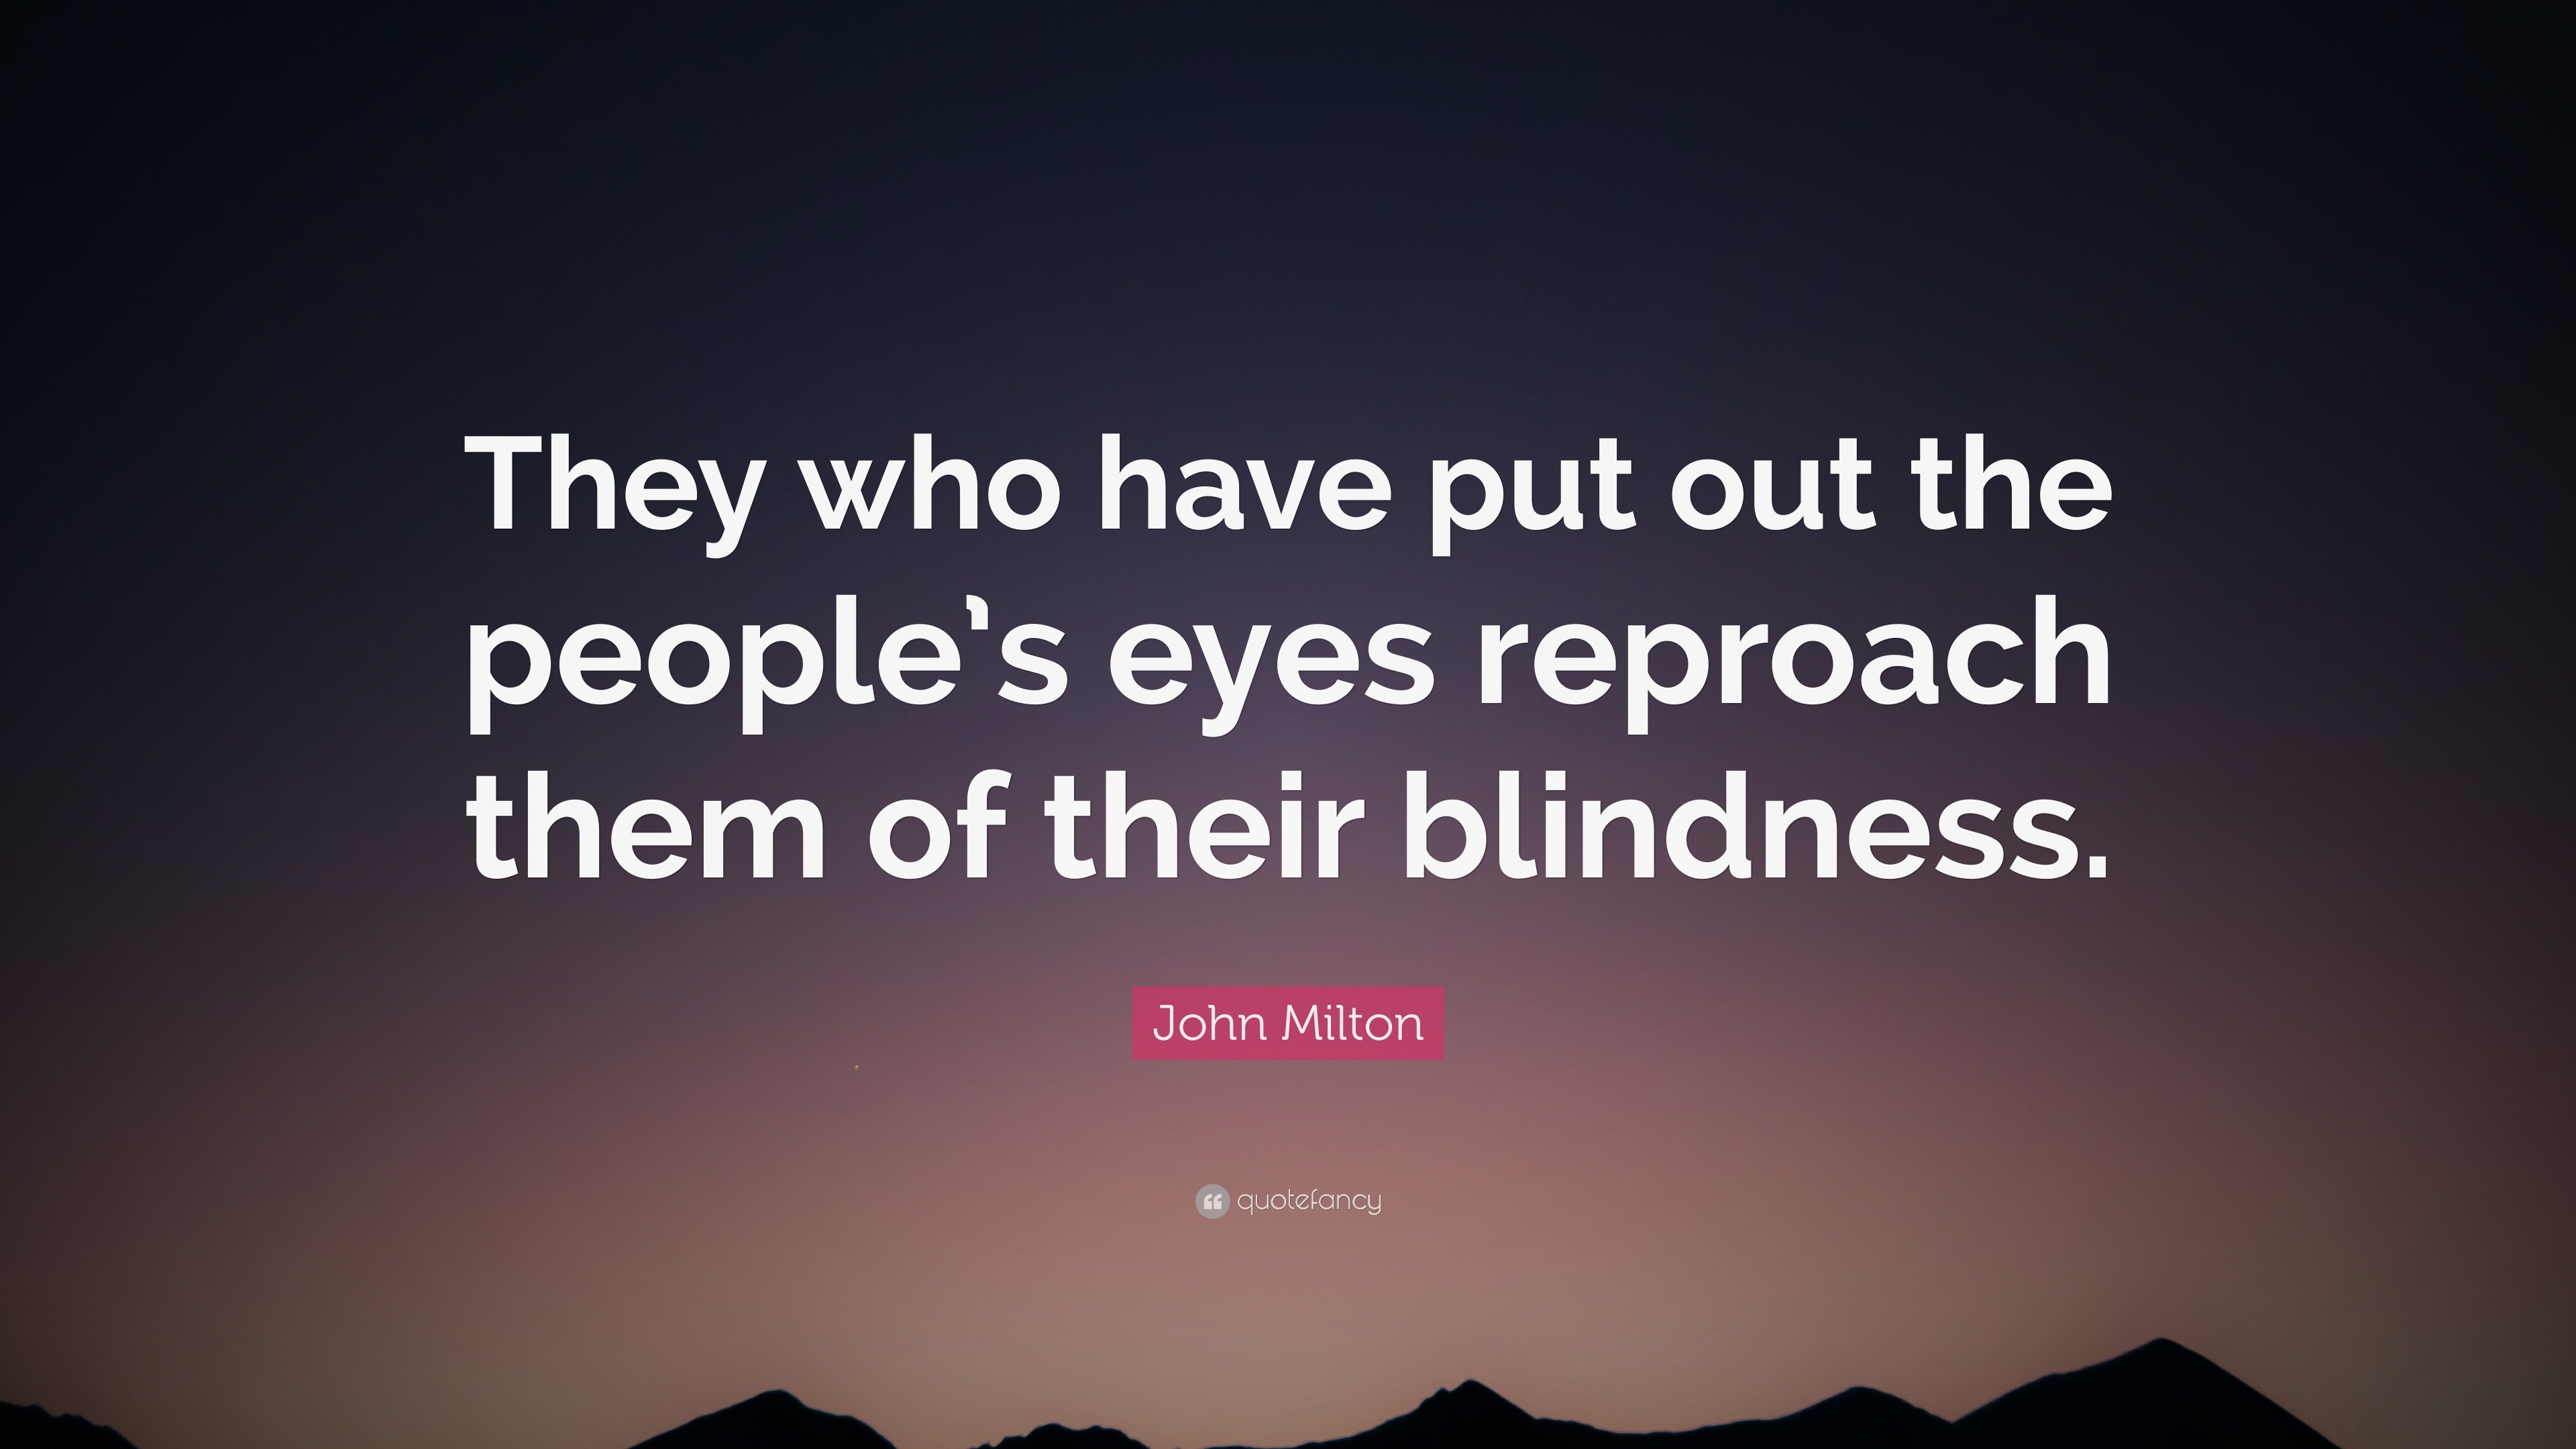 John Milton Quote: “They who have put out the people’s eyes reproach ...